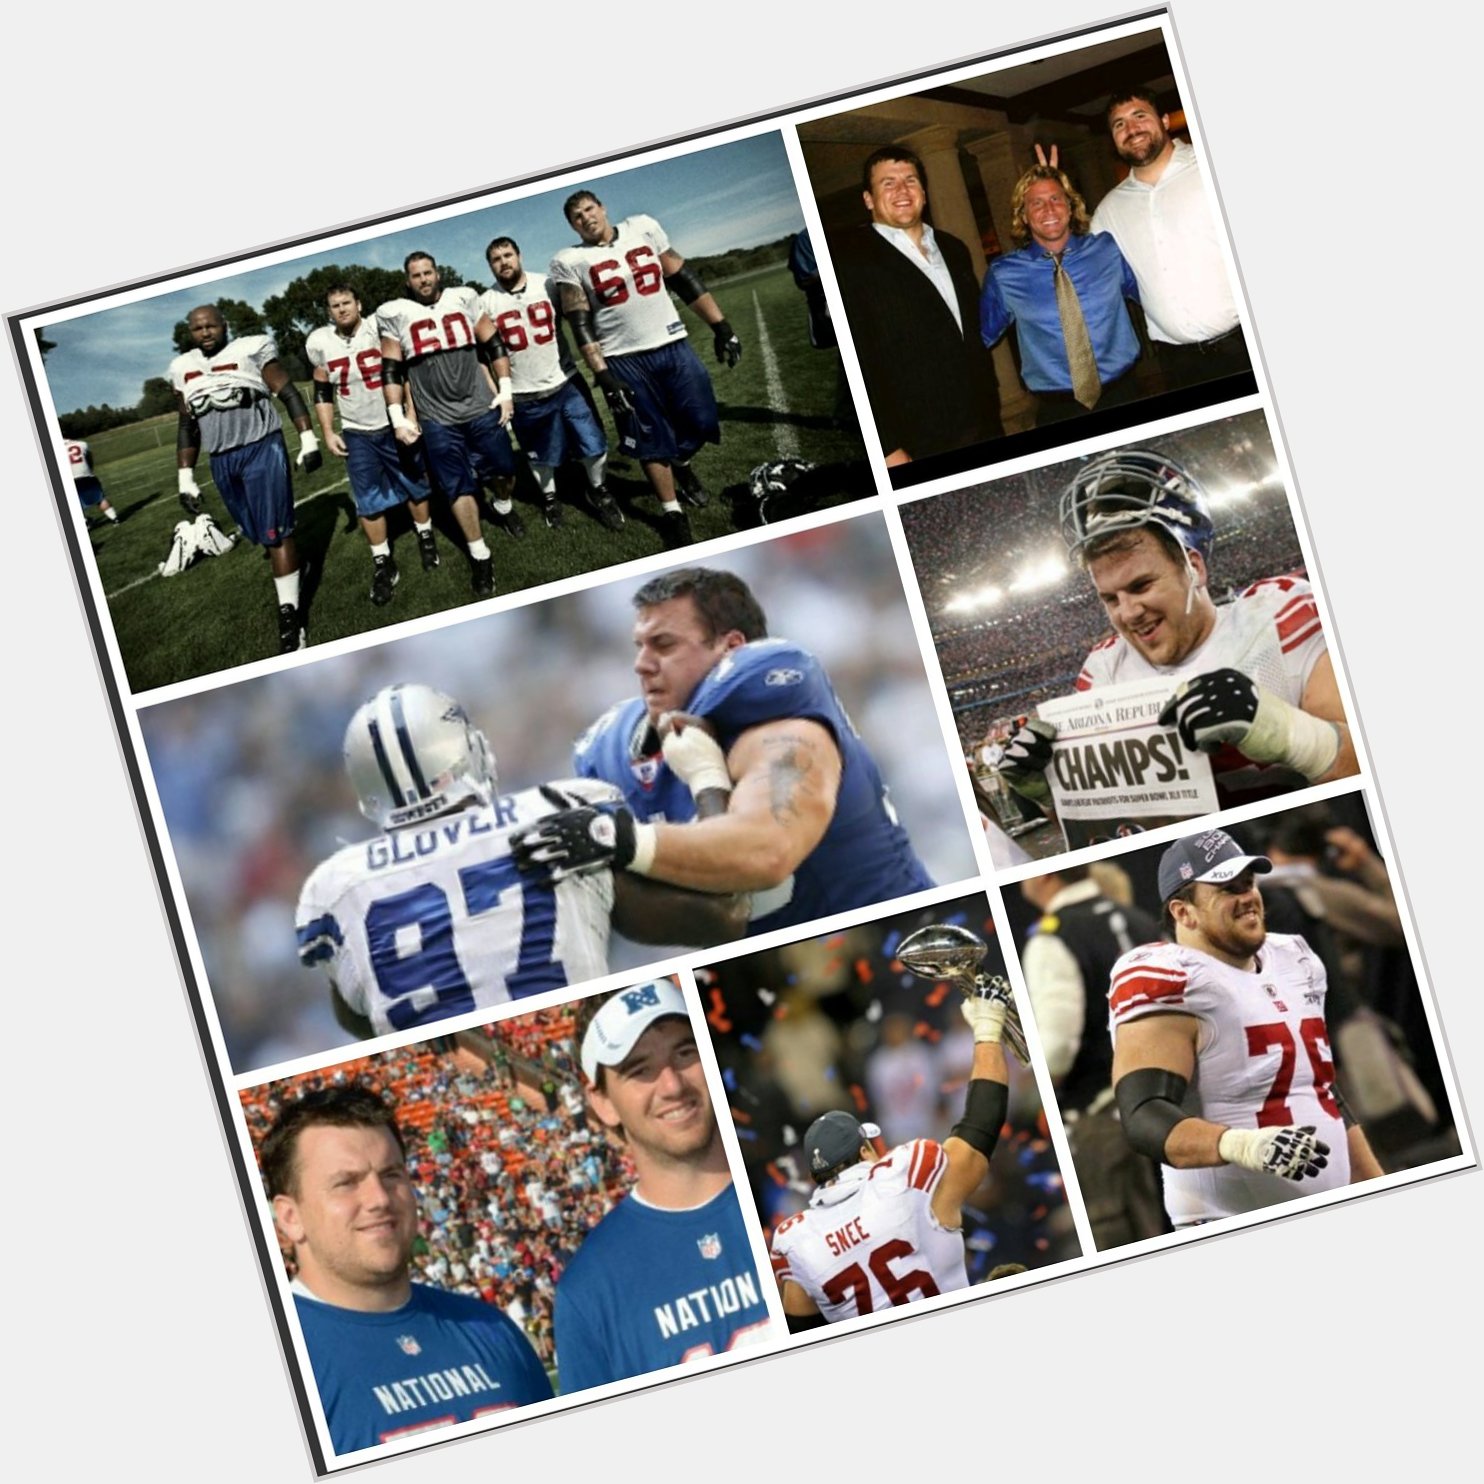 Happy Birthday Chris Snee hope you enjoy your GIANT day!    